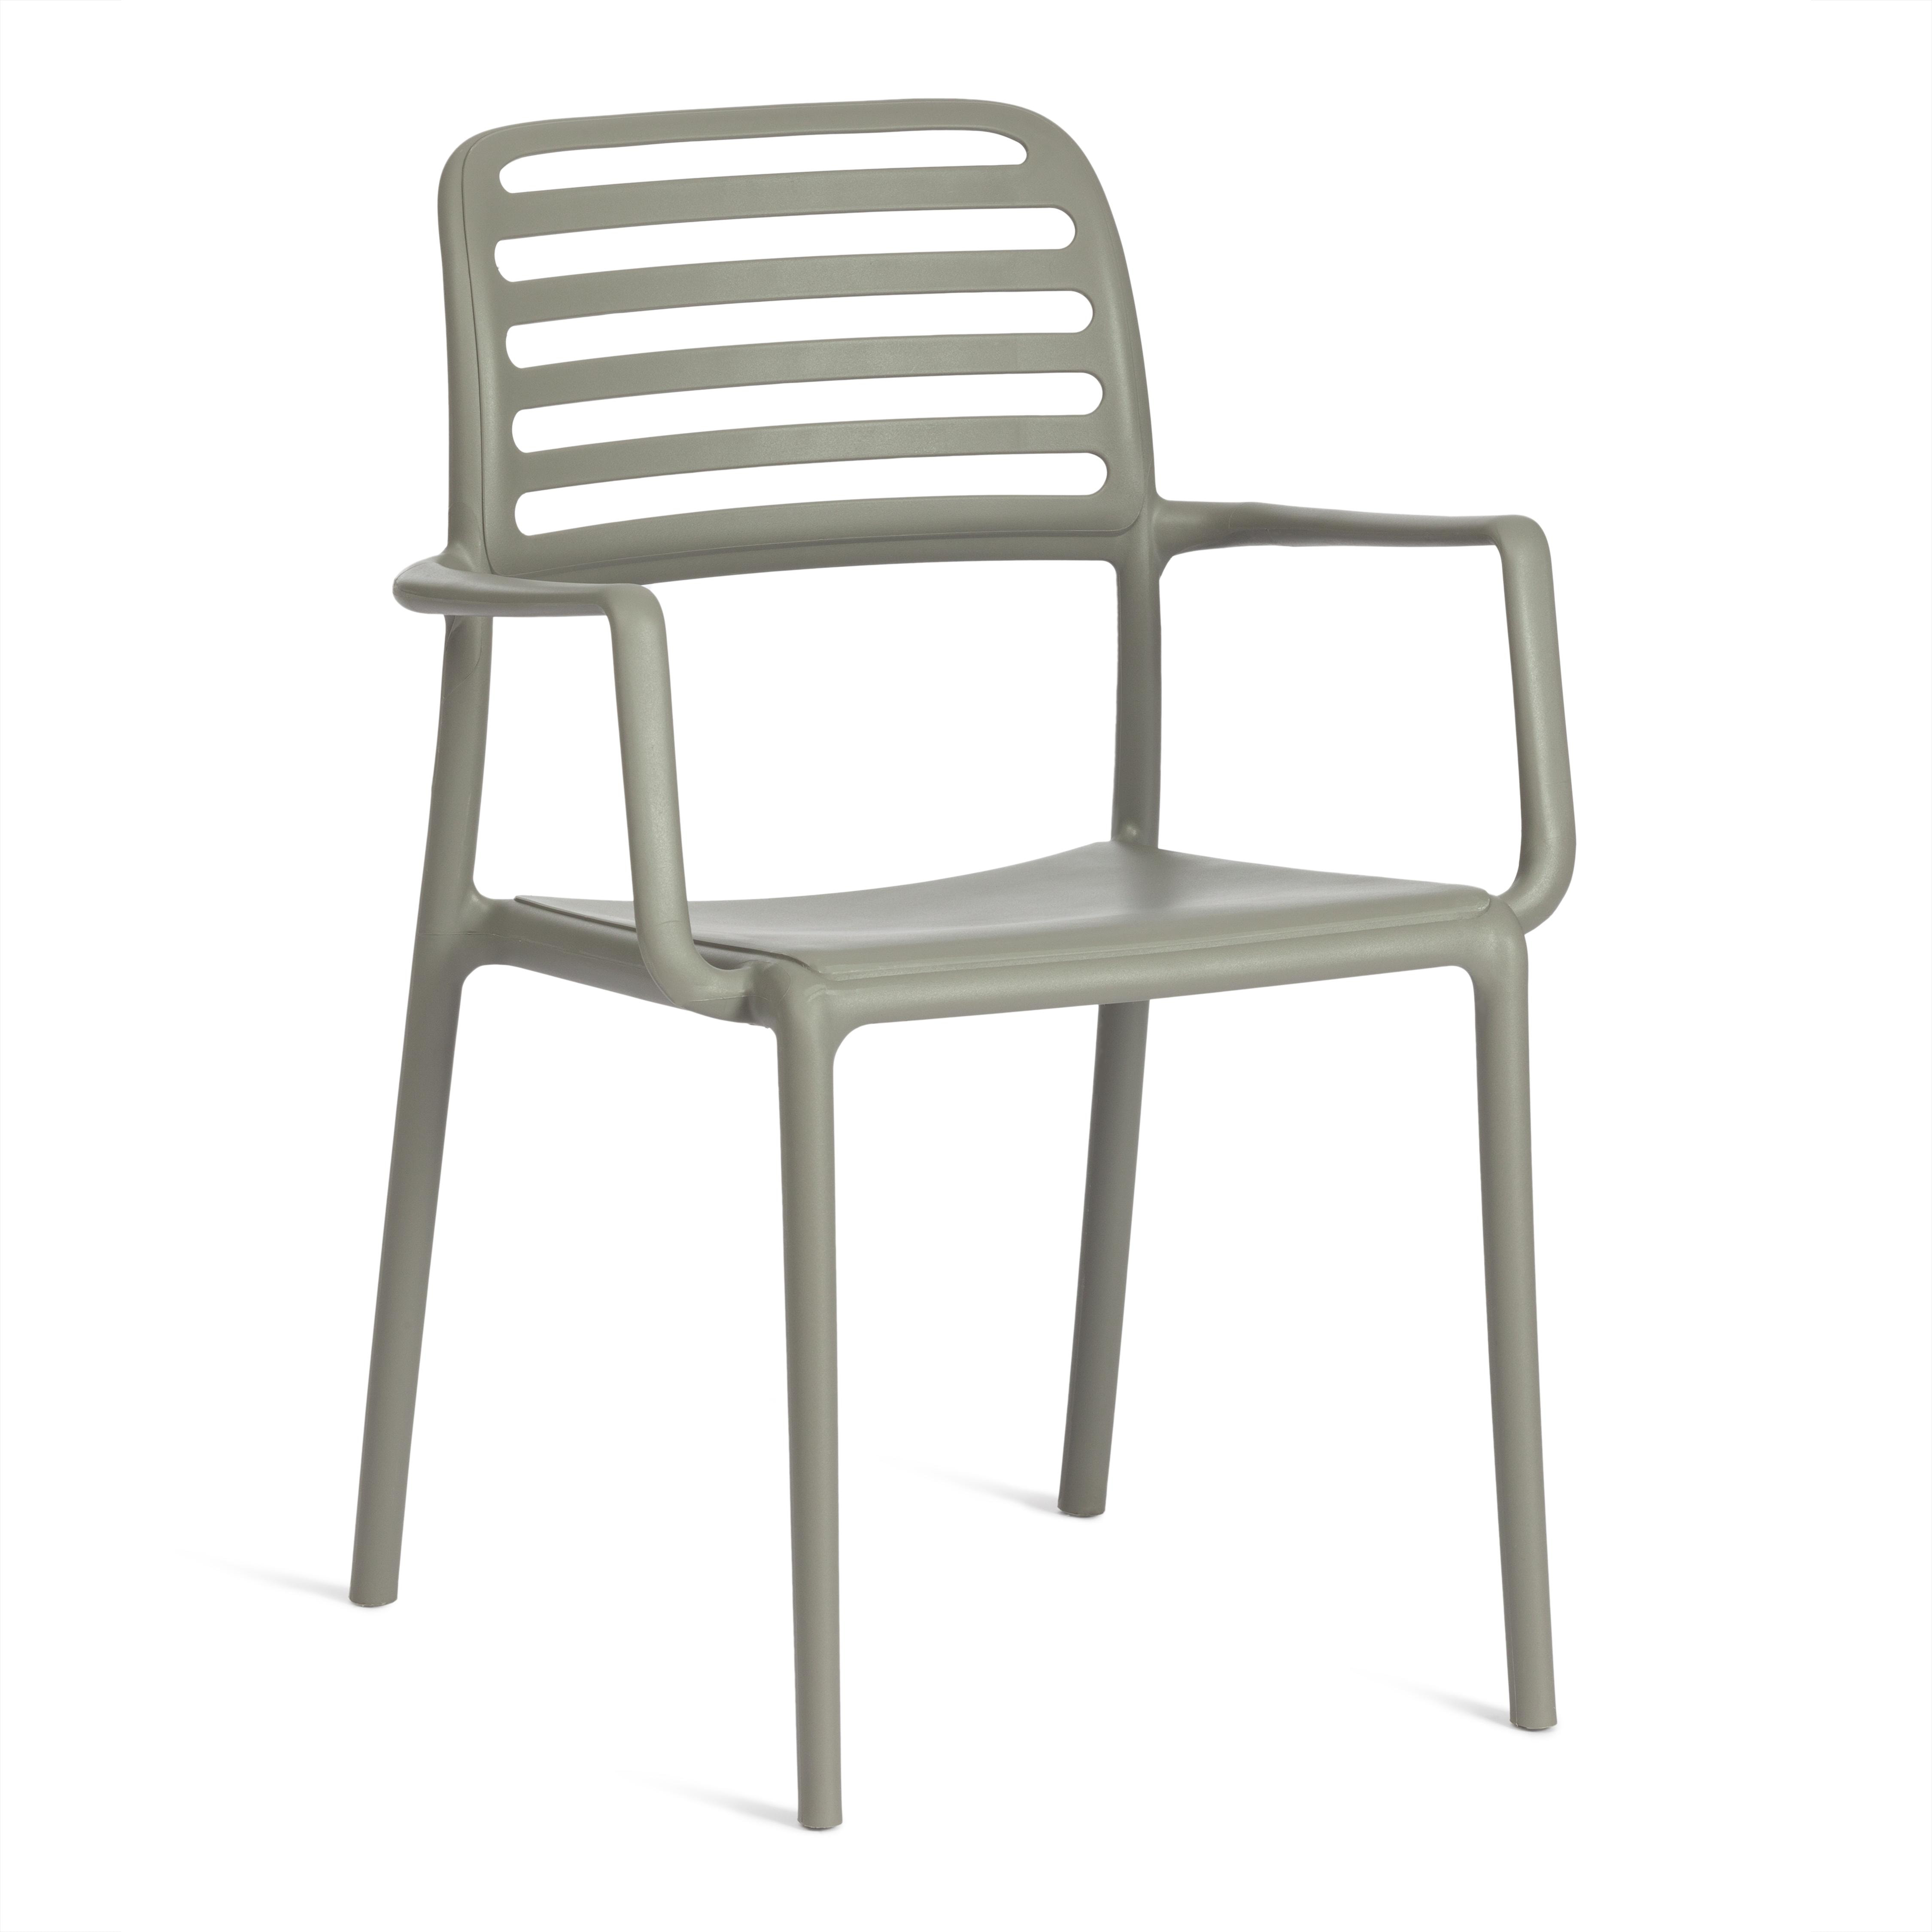  TetChair VALUTTO ,  34630